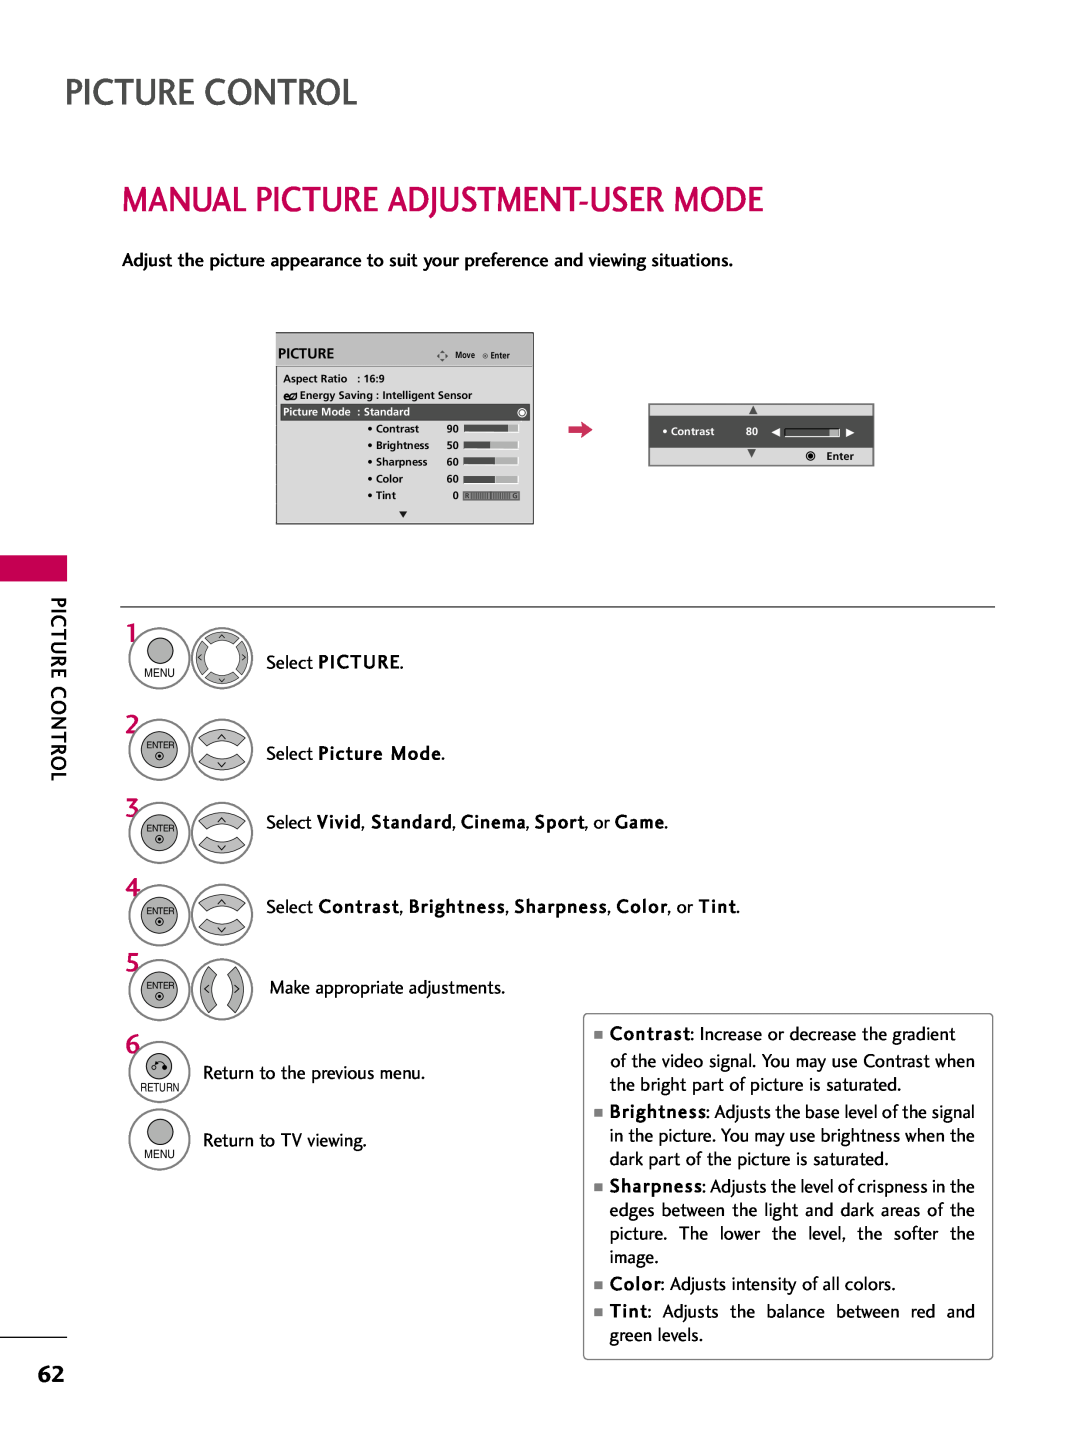 LG Electronics 42PQ12, 50PQ12 Manual Picture Adjustment-User Mode, Picture Control, Make appropriate adjustments 